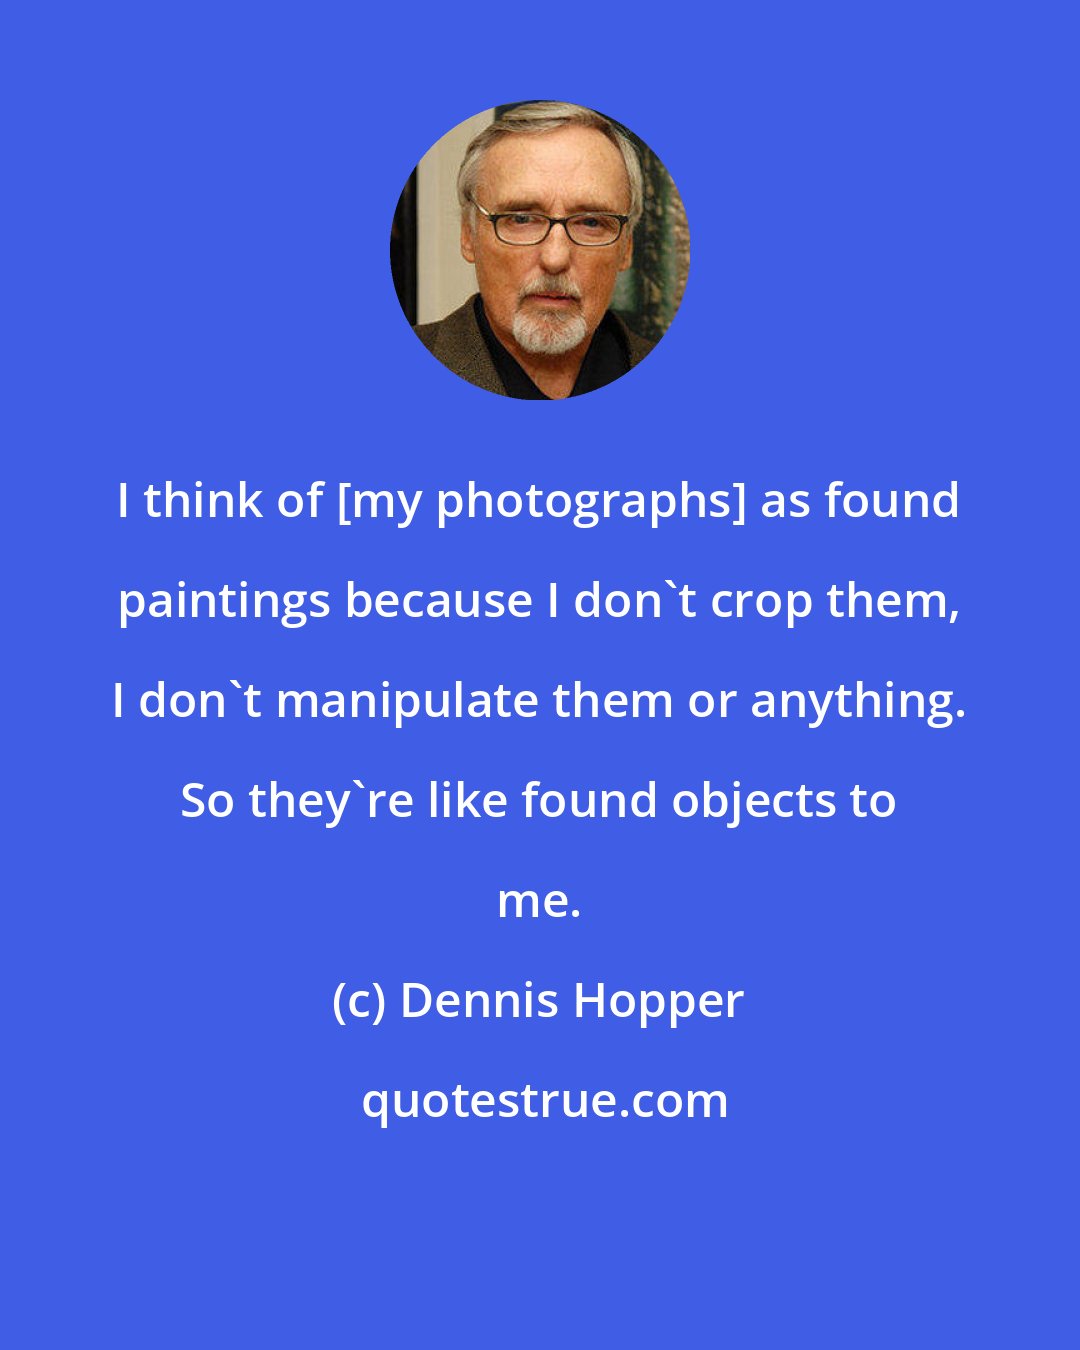 Dennis Hopper: I think of [my photographs] as found paintings because I don't crop them, I don't manipulate them or anything. So they're like found objects to me.